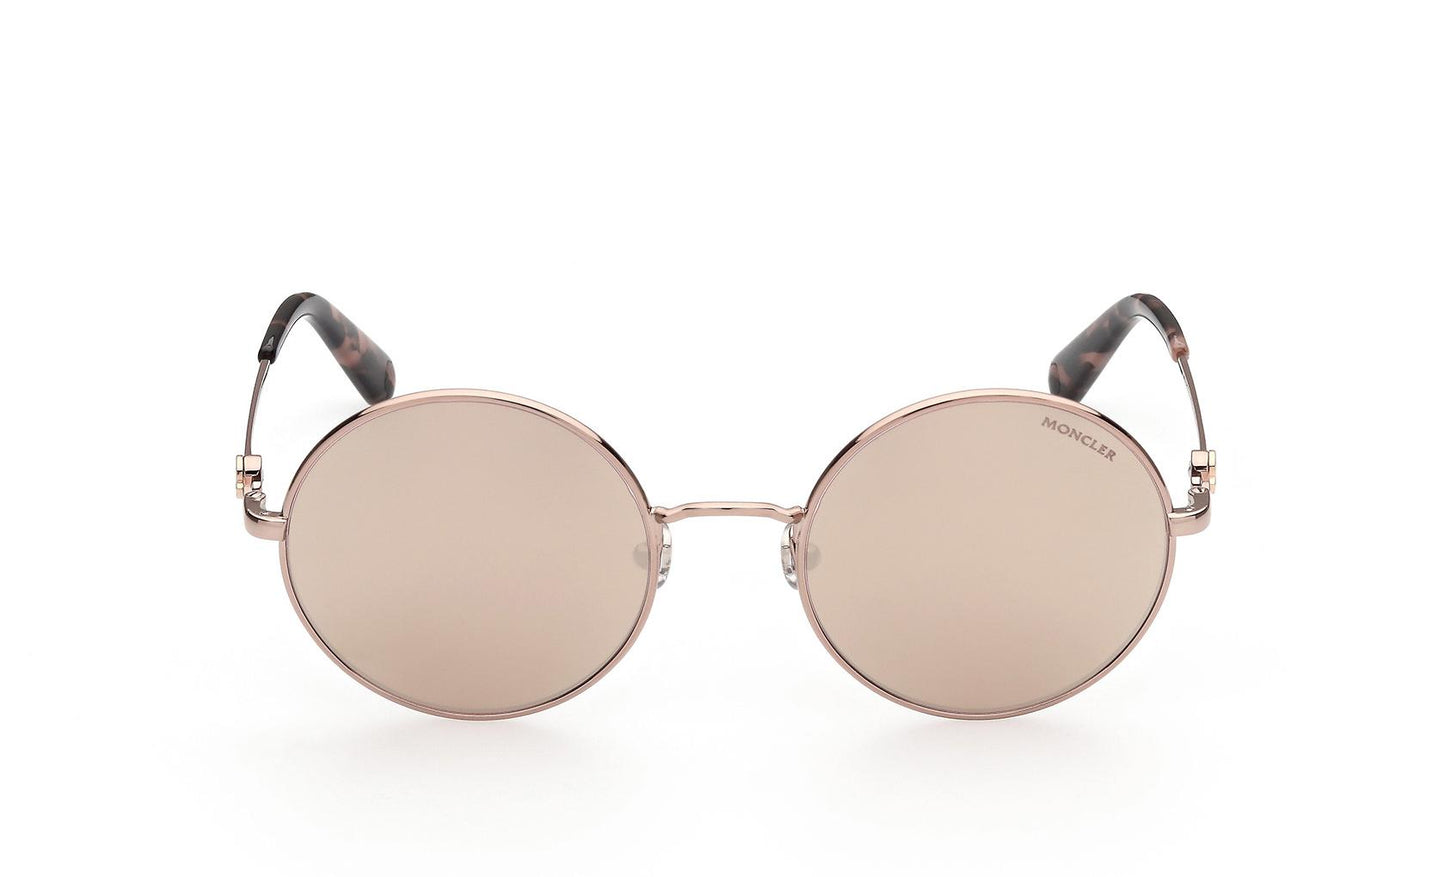 Load image into Gallery viewer, Moncler Sunglasses ML0193 34Z
